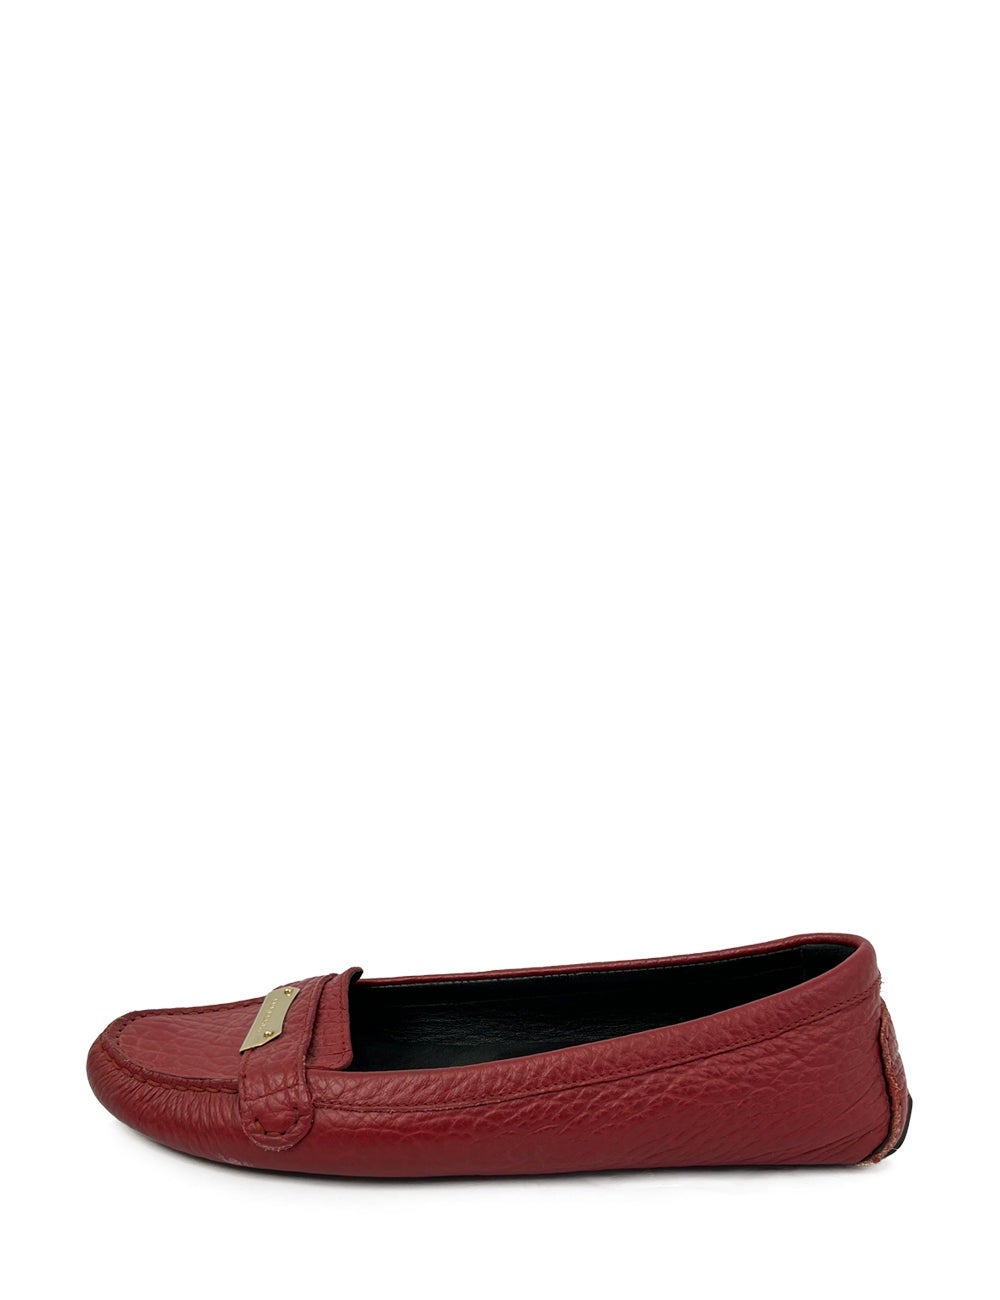 Burberry EU 38 Red Leather Loafers For Sale